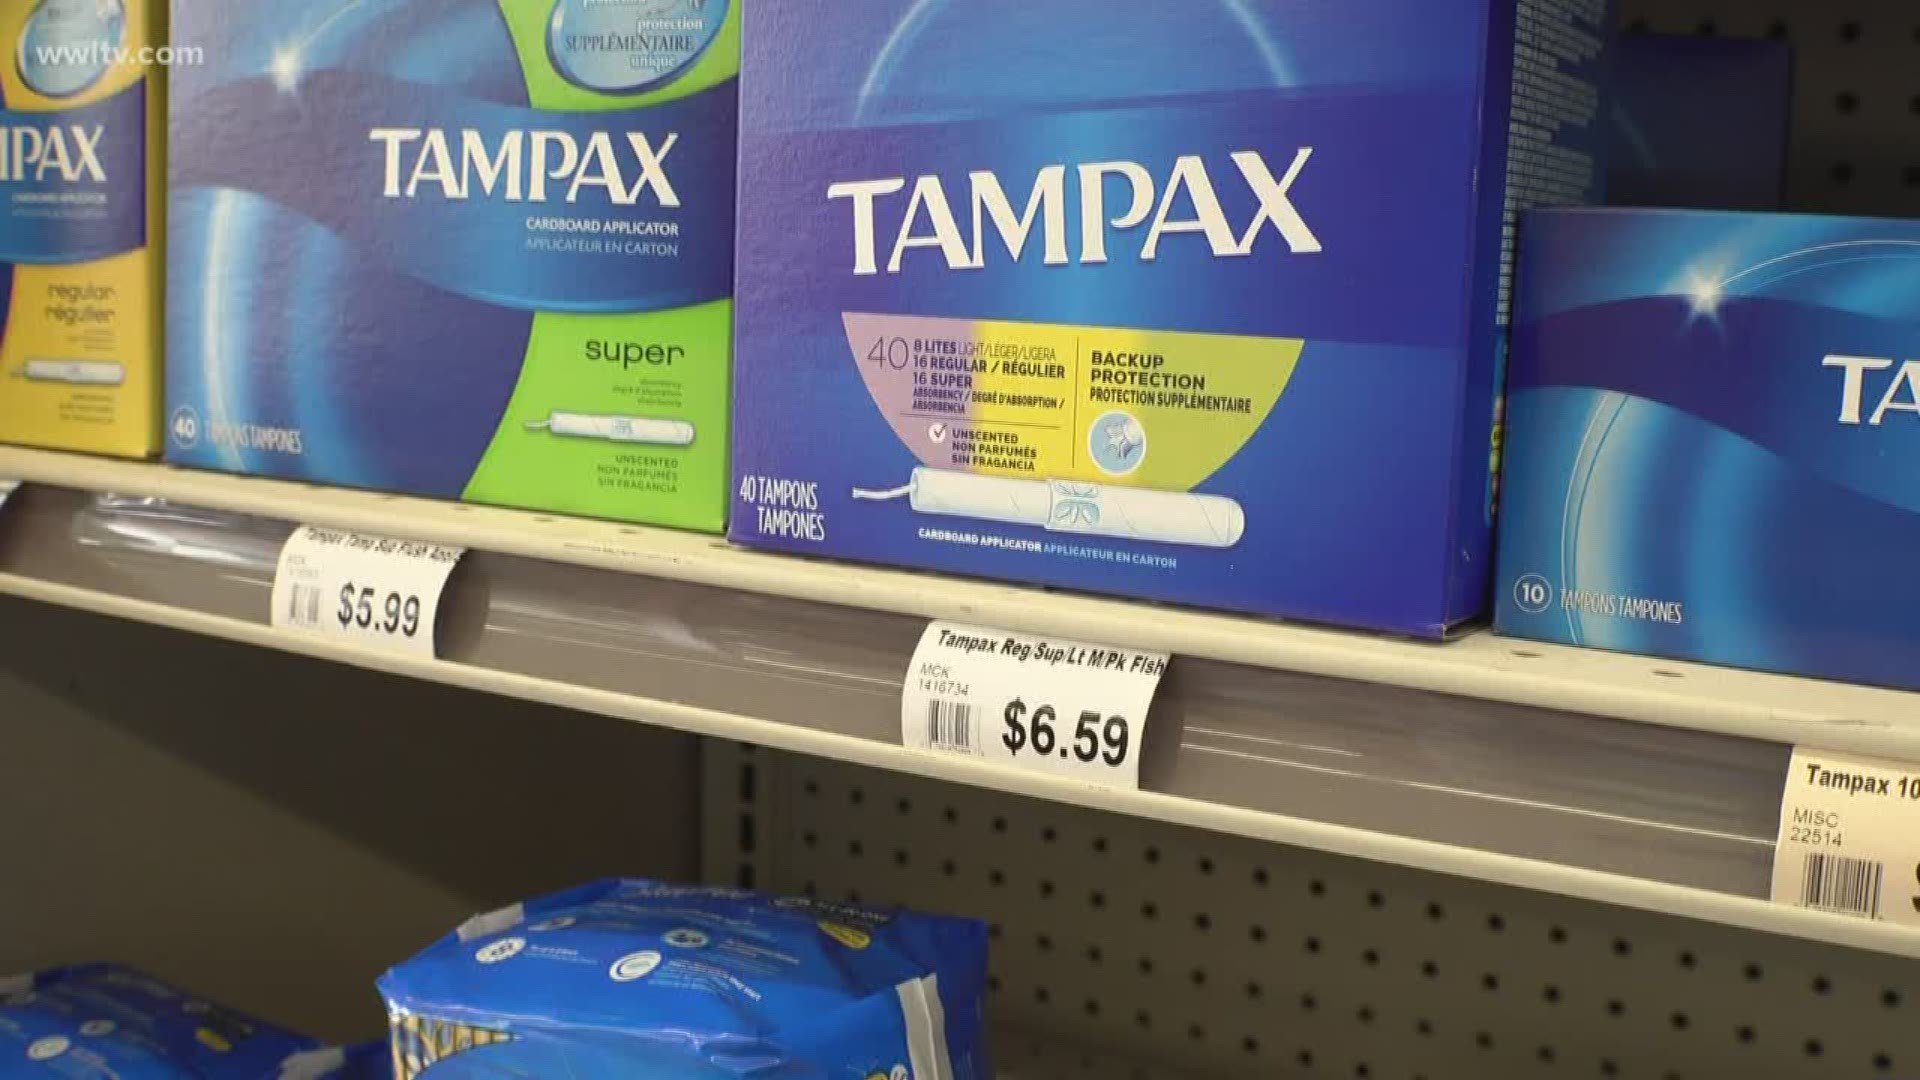 The New York based Tax Free Period campaign says menstrual products are a necessity and should be tax exempt.